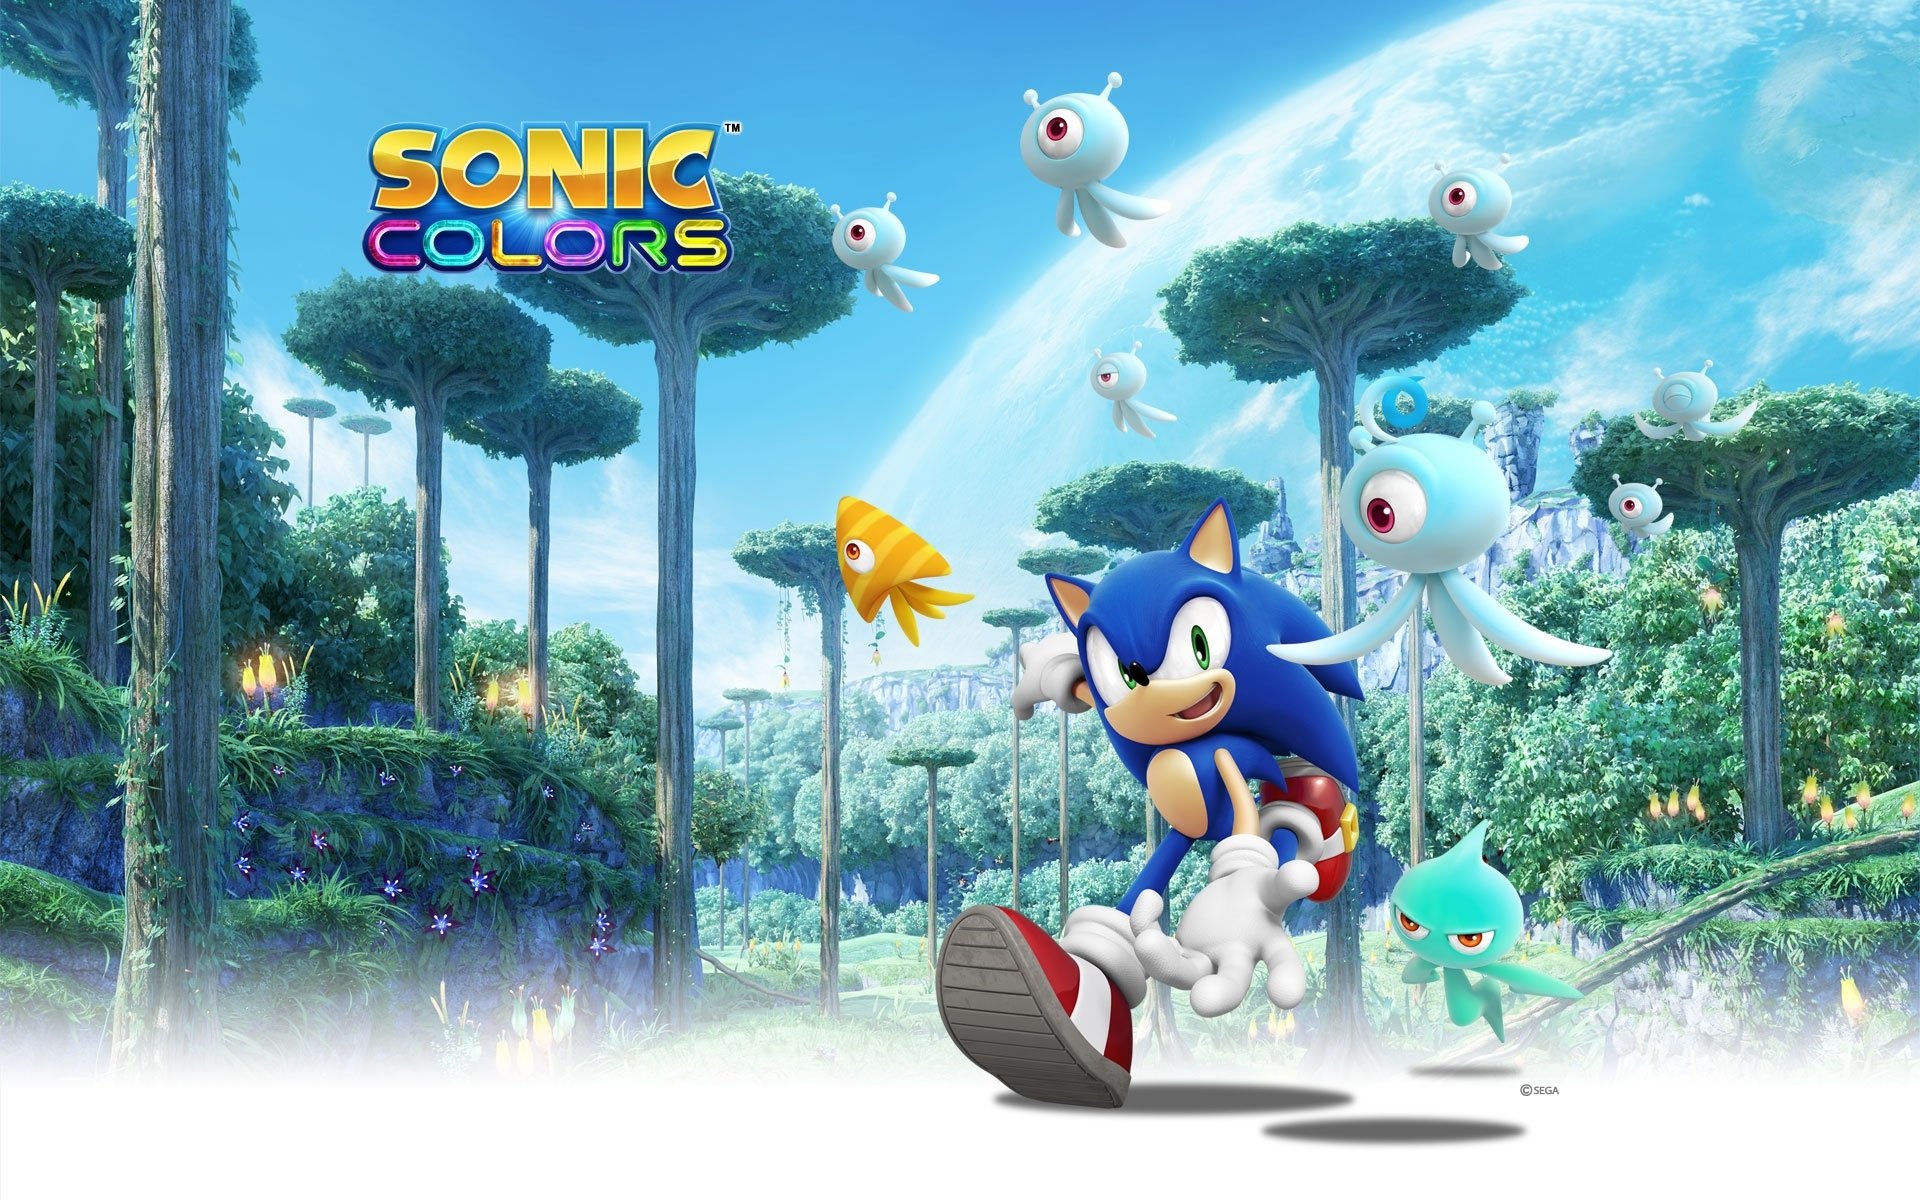 sonic the hedgehog wallpapers 2015 wallpaper cave on sonic colors wallpapers